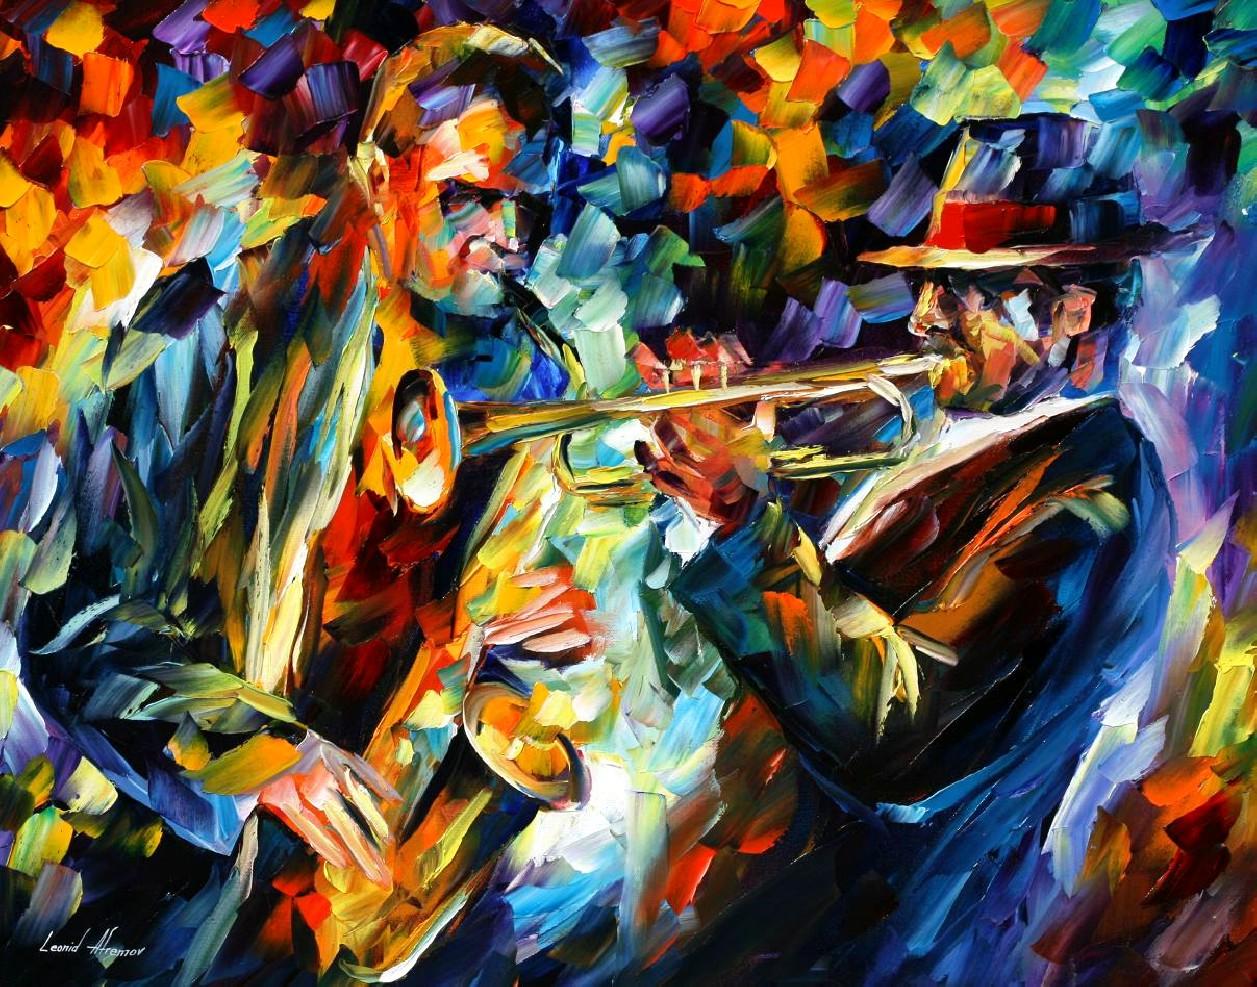 JAZZ DUO — PALETTE KNIFE Oil Painting On Canvas Art By Leonid Afremov -  Size 24x30